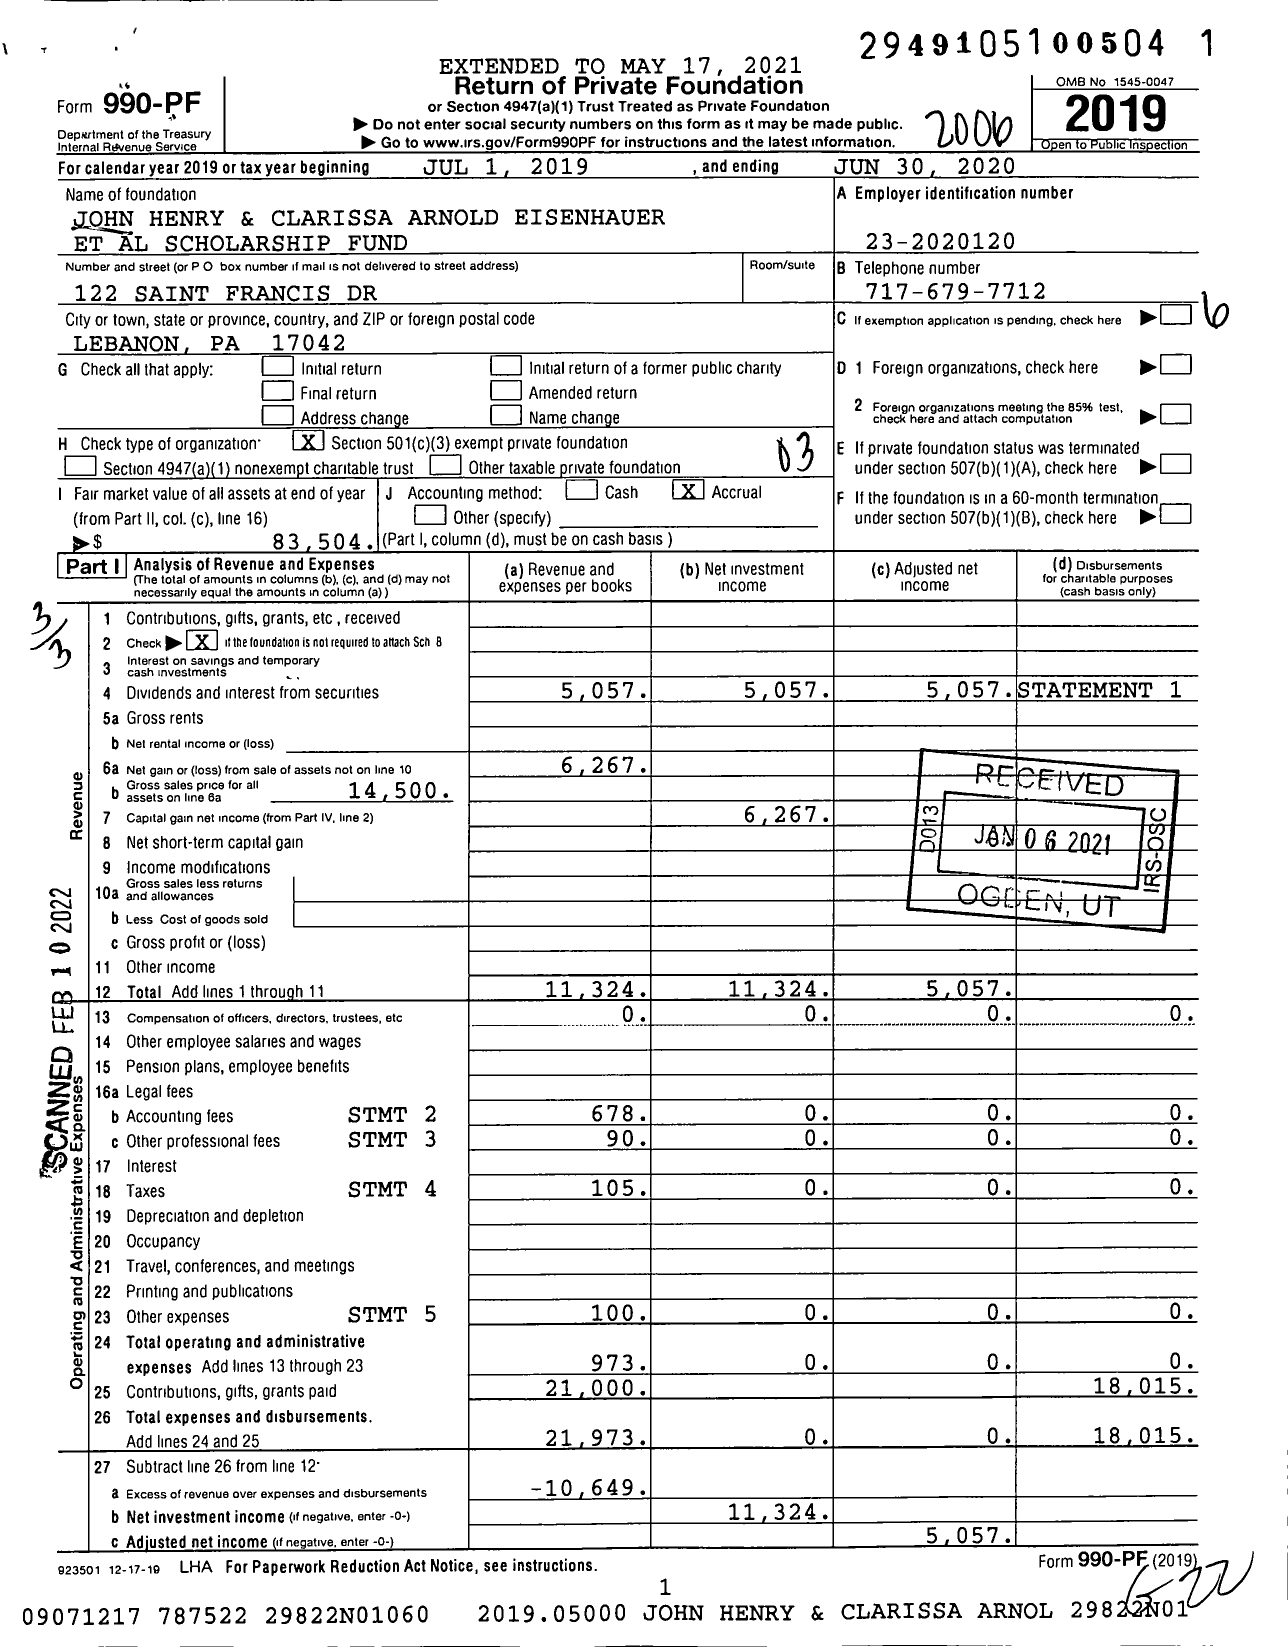 Image of first page of 2019 Form 990PF for John Henry and Clarissa Arnold Eisenhauer Et Al Scholarship Fund